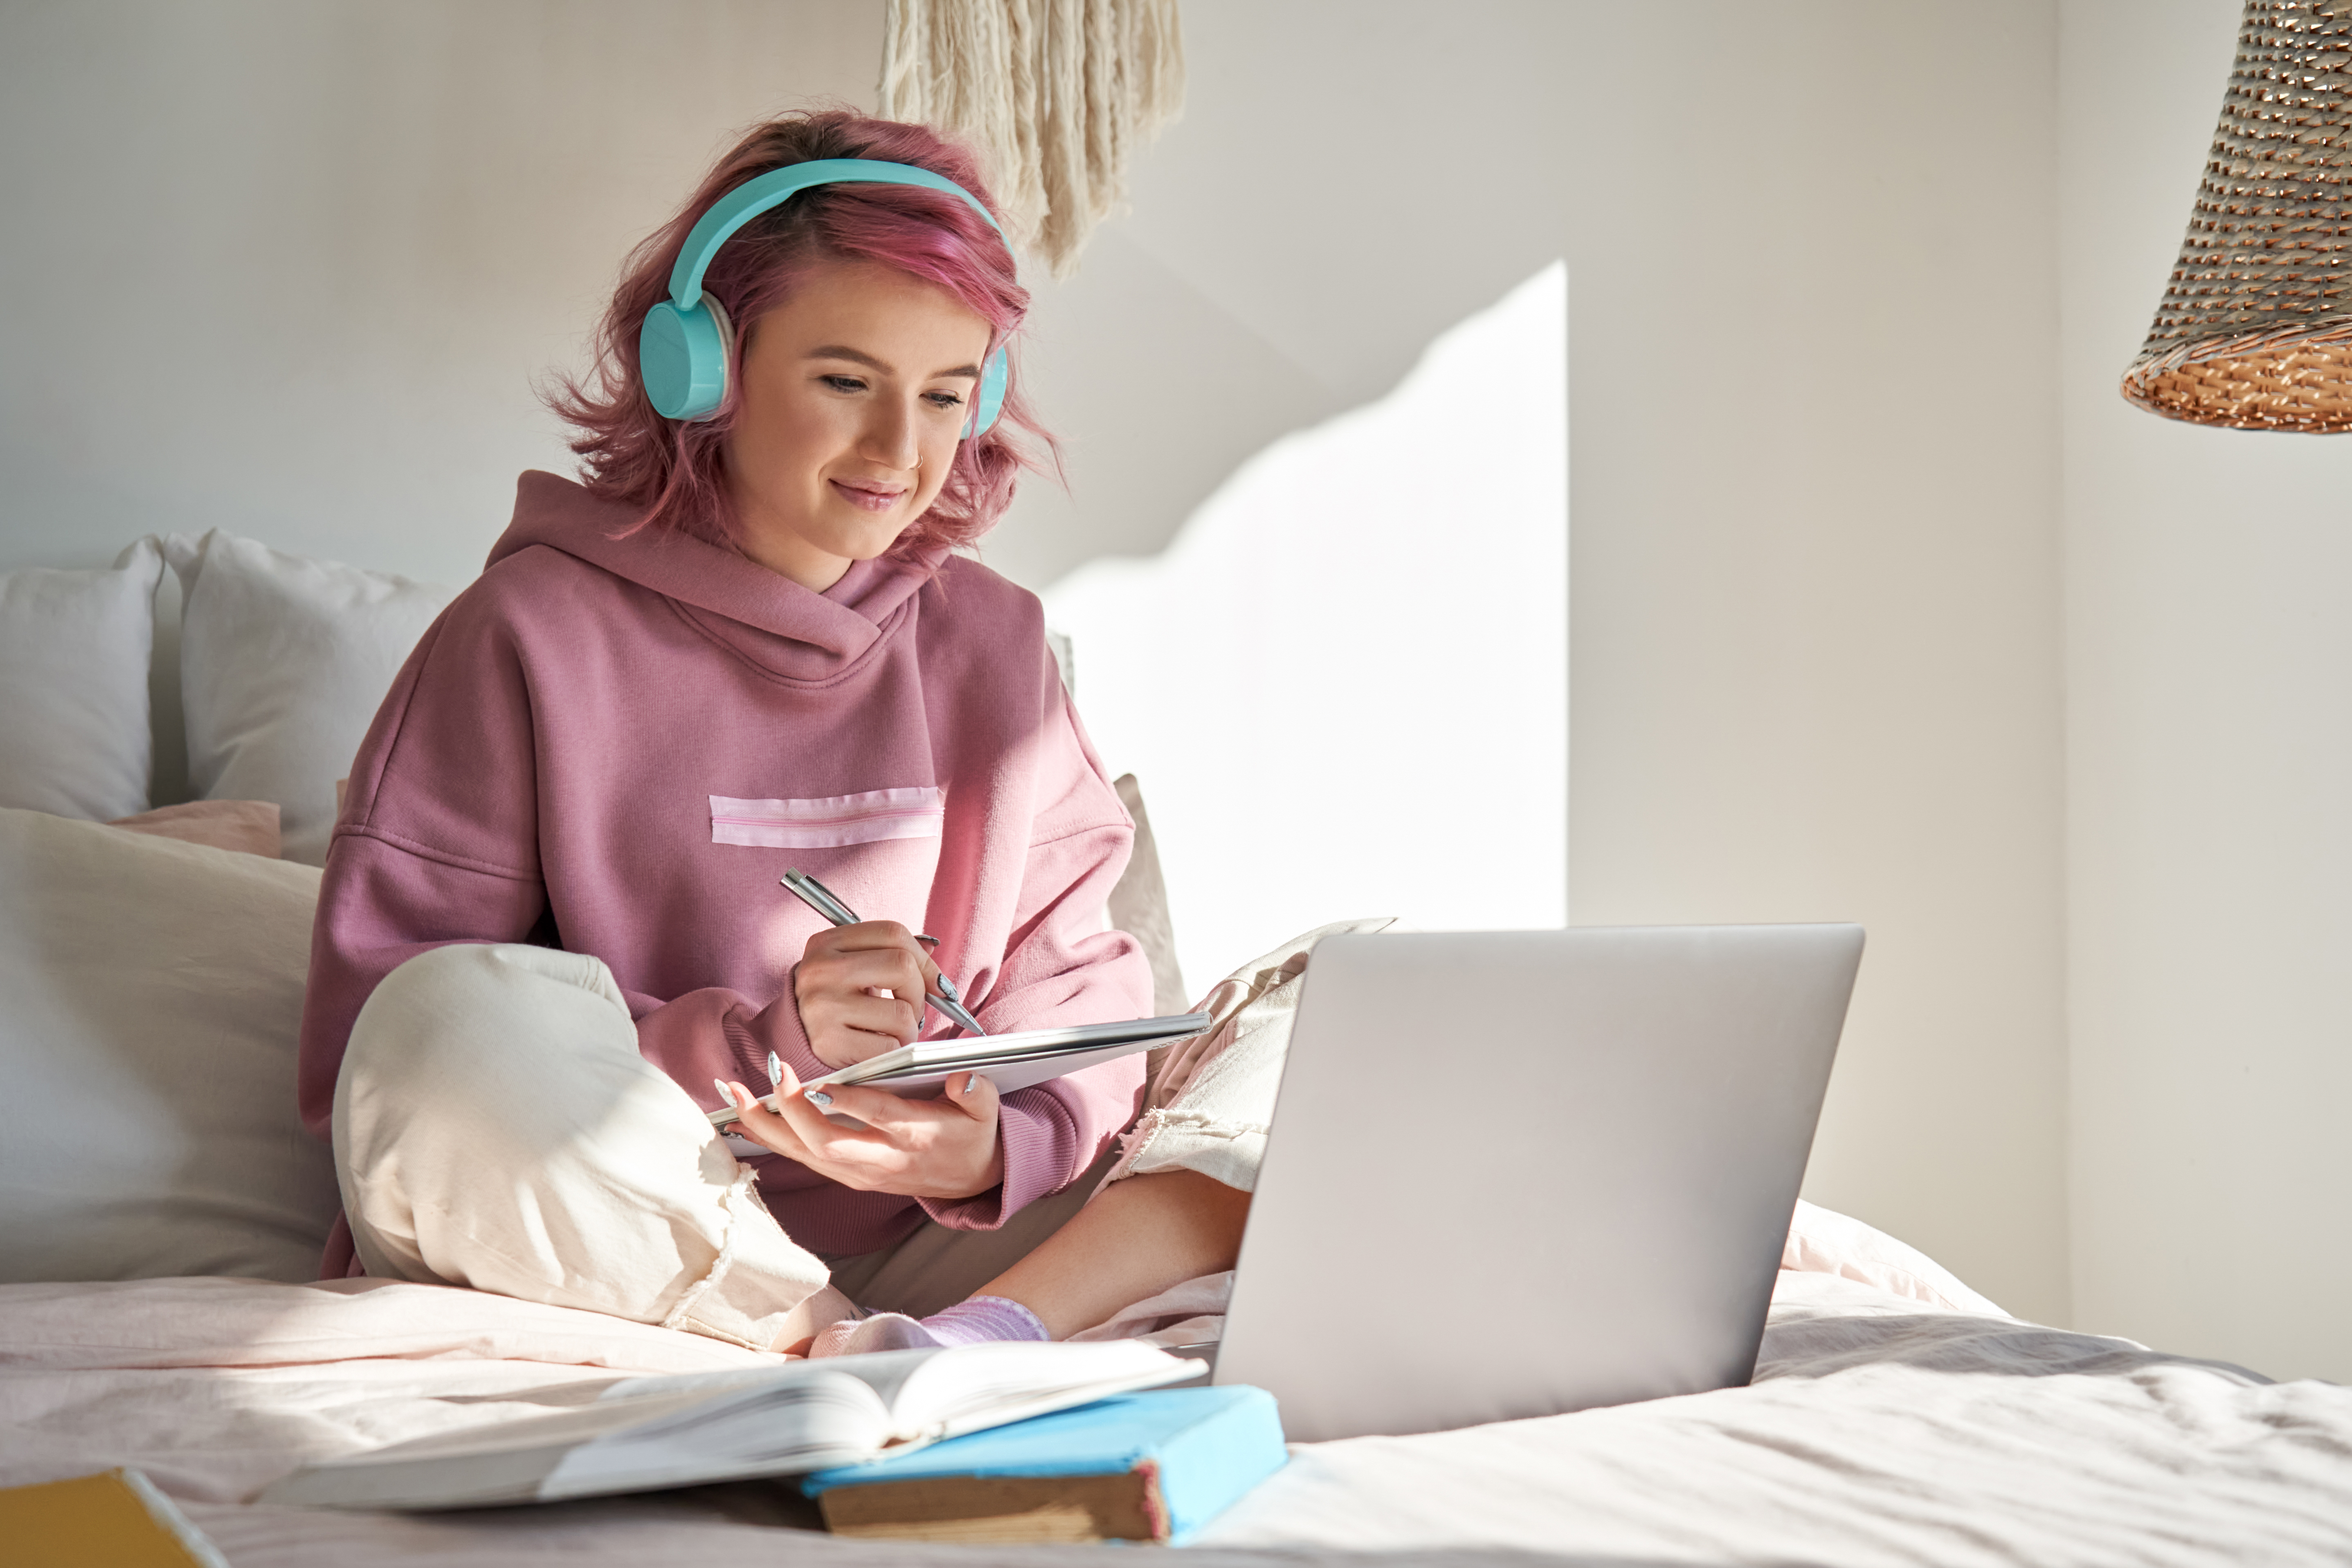 Young woman with headphones on sitting on the bed working on her laptop